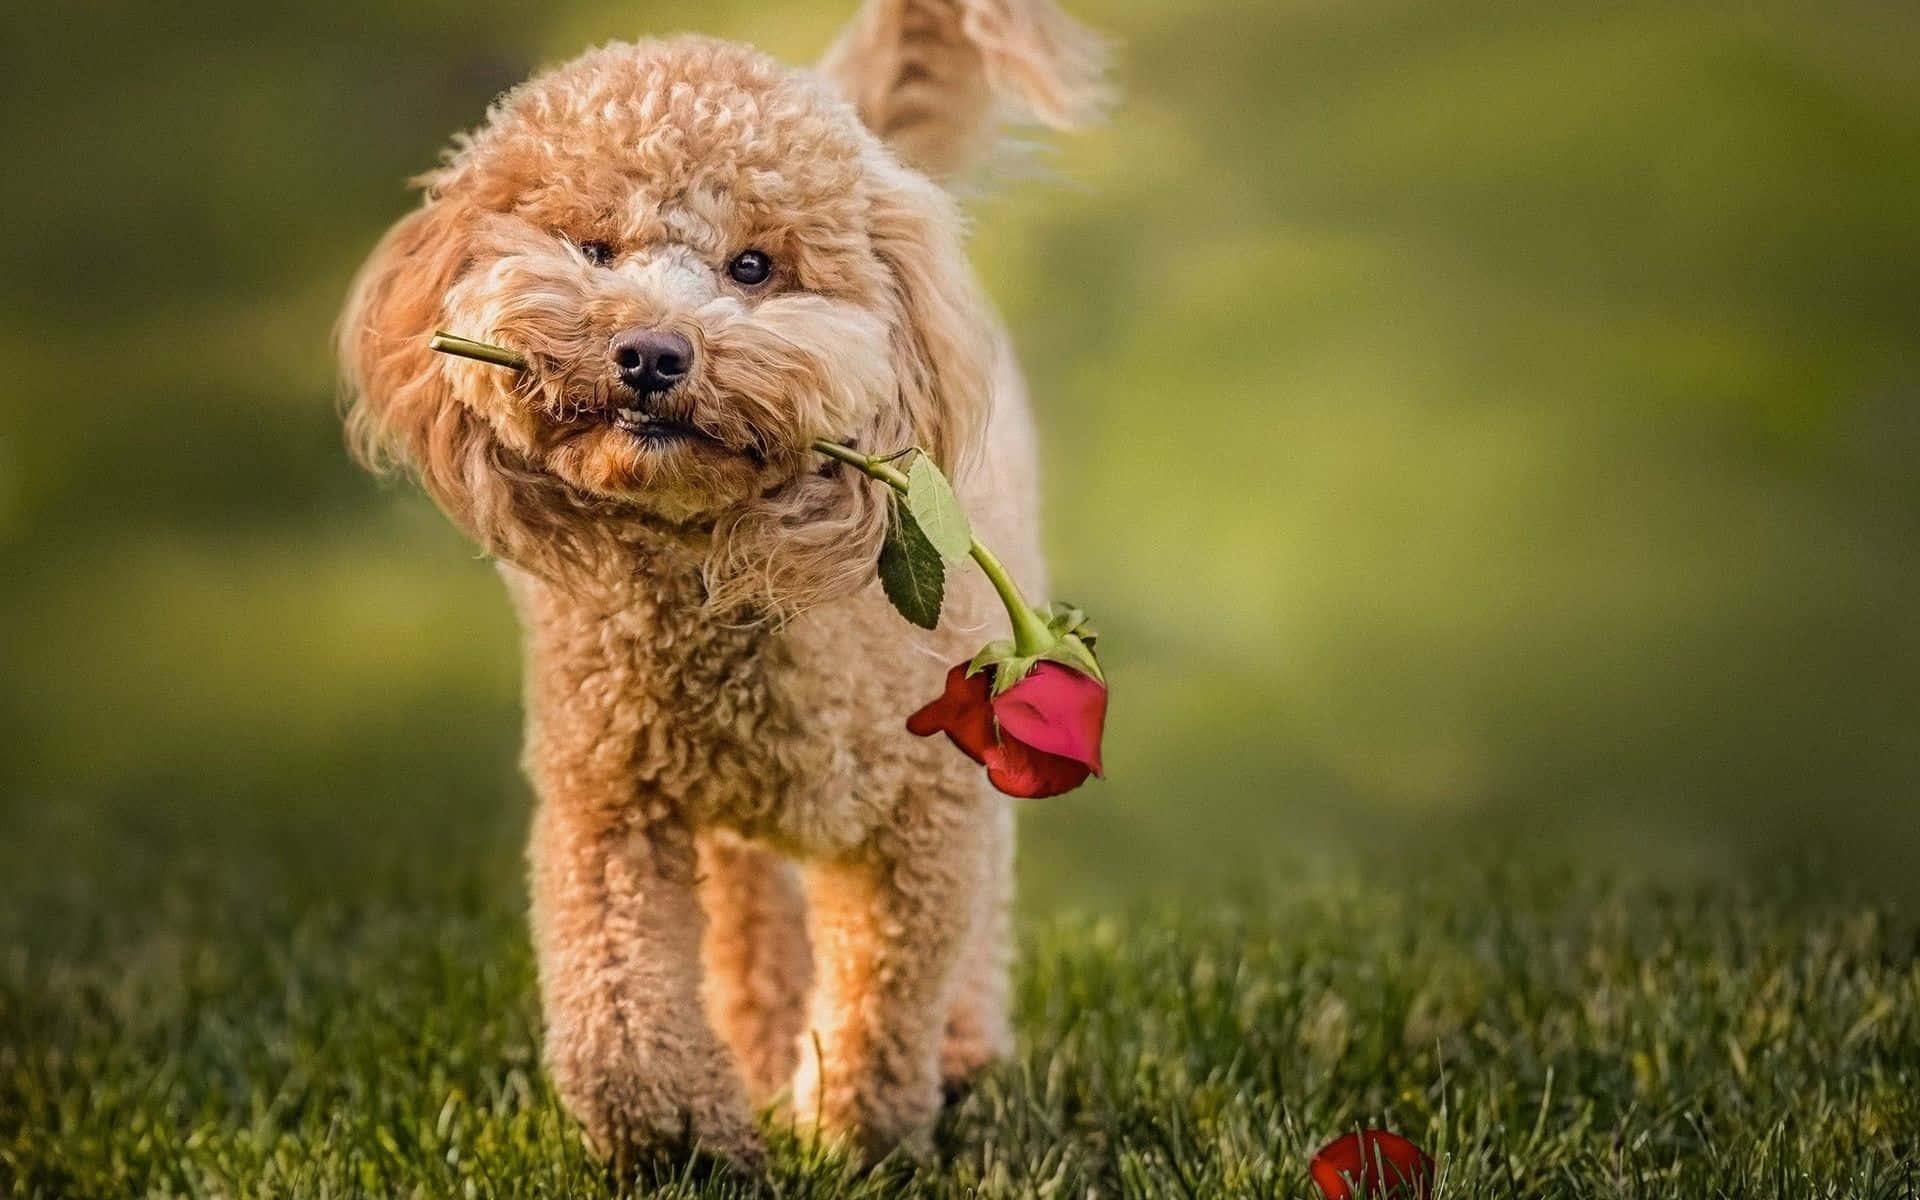 A Poodle Dog Holding A Rose In Its Mouth